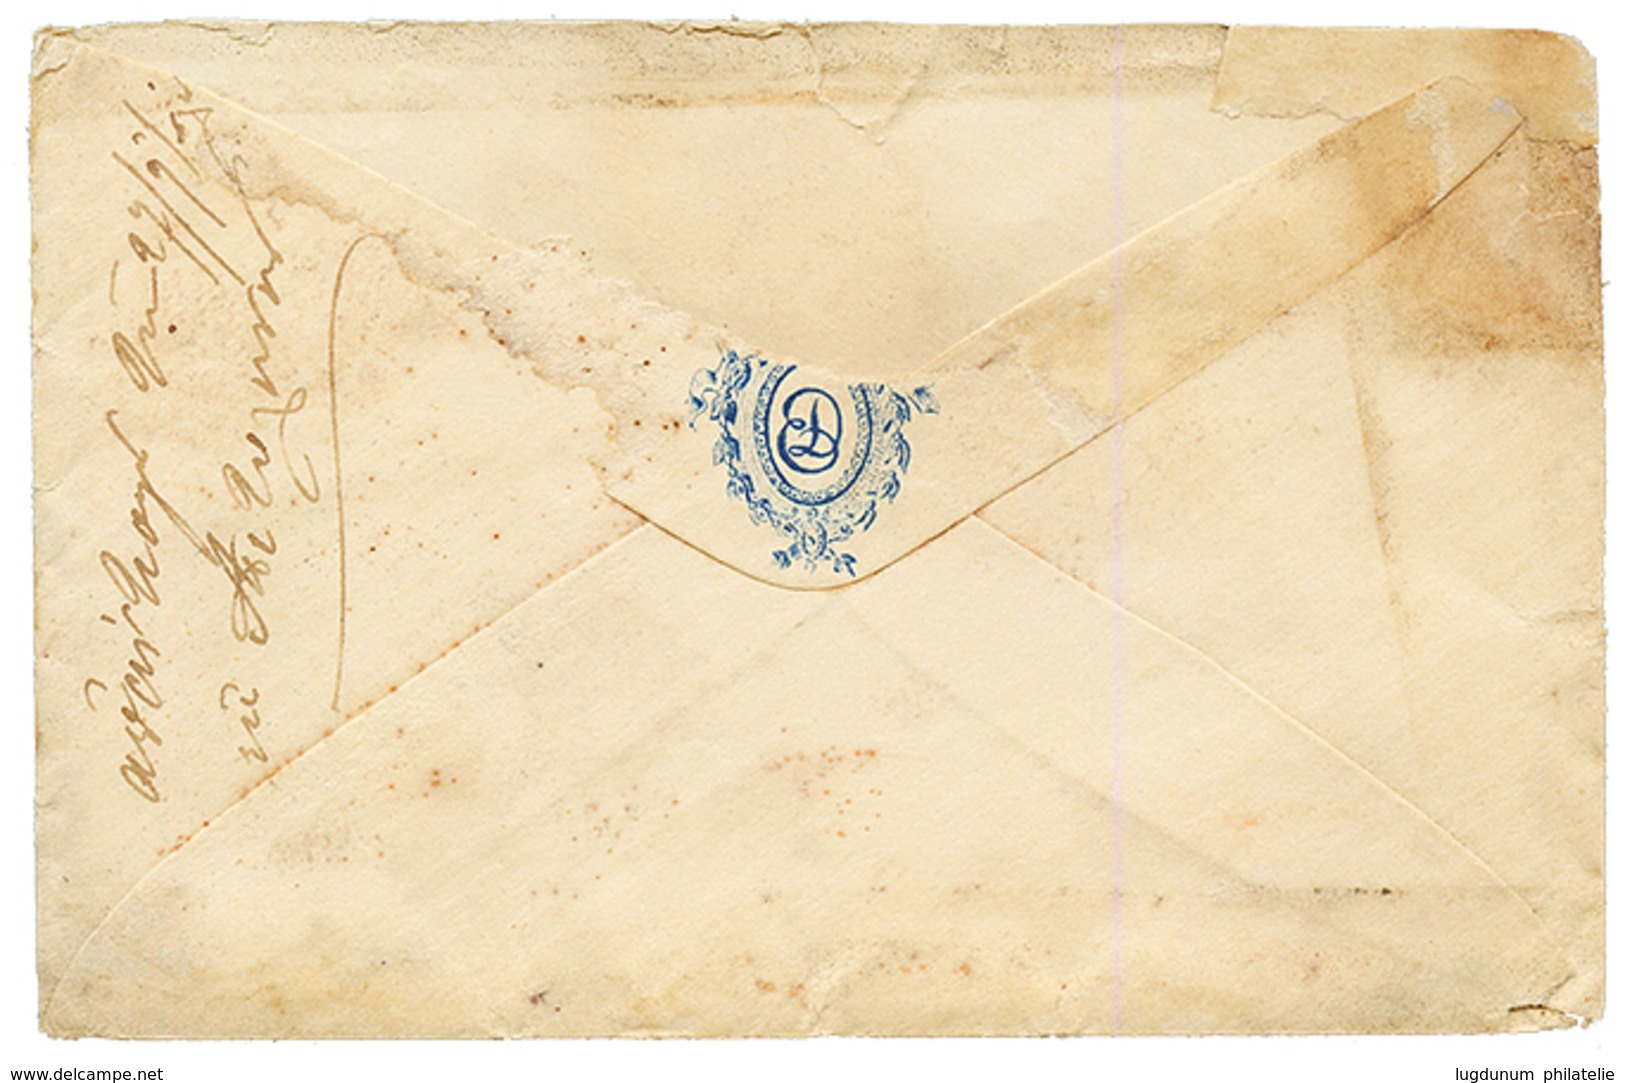 "LEMNOS Via TENEDOS" : 1870 10 SOLDI Canc. TENEDOS On Envelope (fault) With Full Text Datelined "LEMNOS" To METELINO. GR - Levant Autrichien